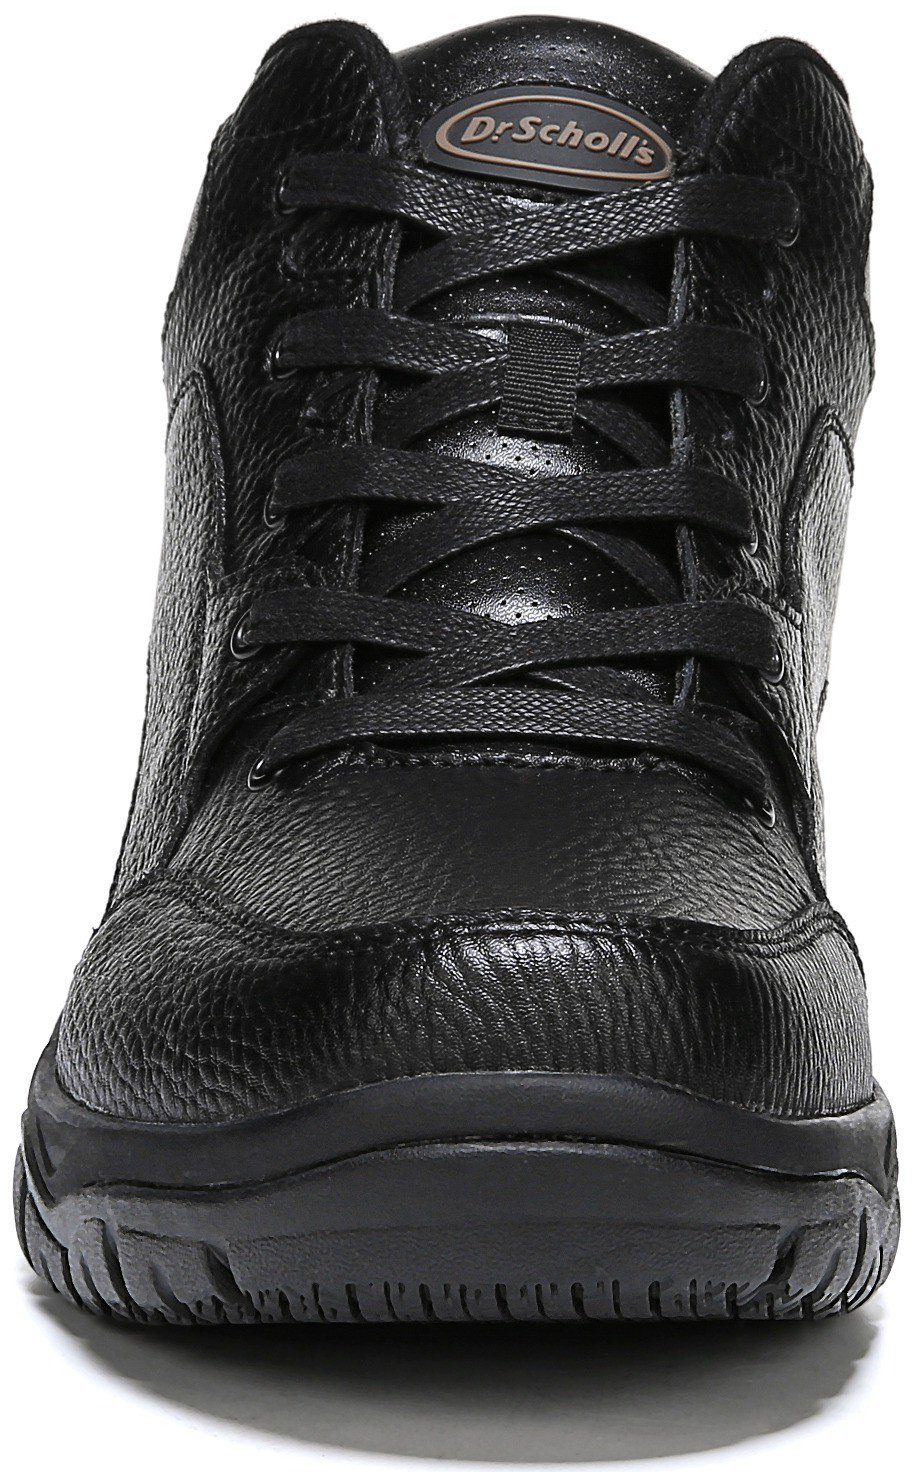 Dr. Scholl's Men's Charge Professional Series Work Boots | Academy